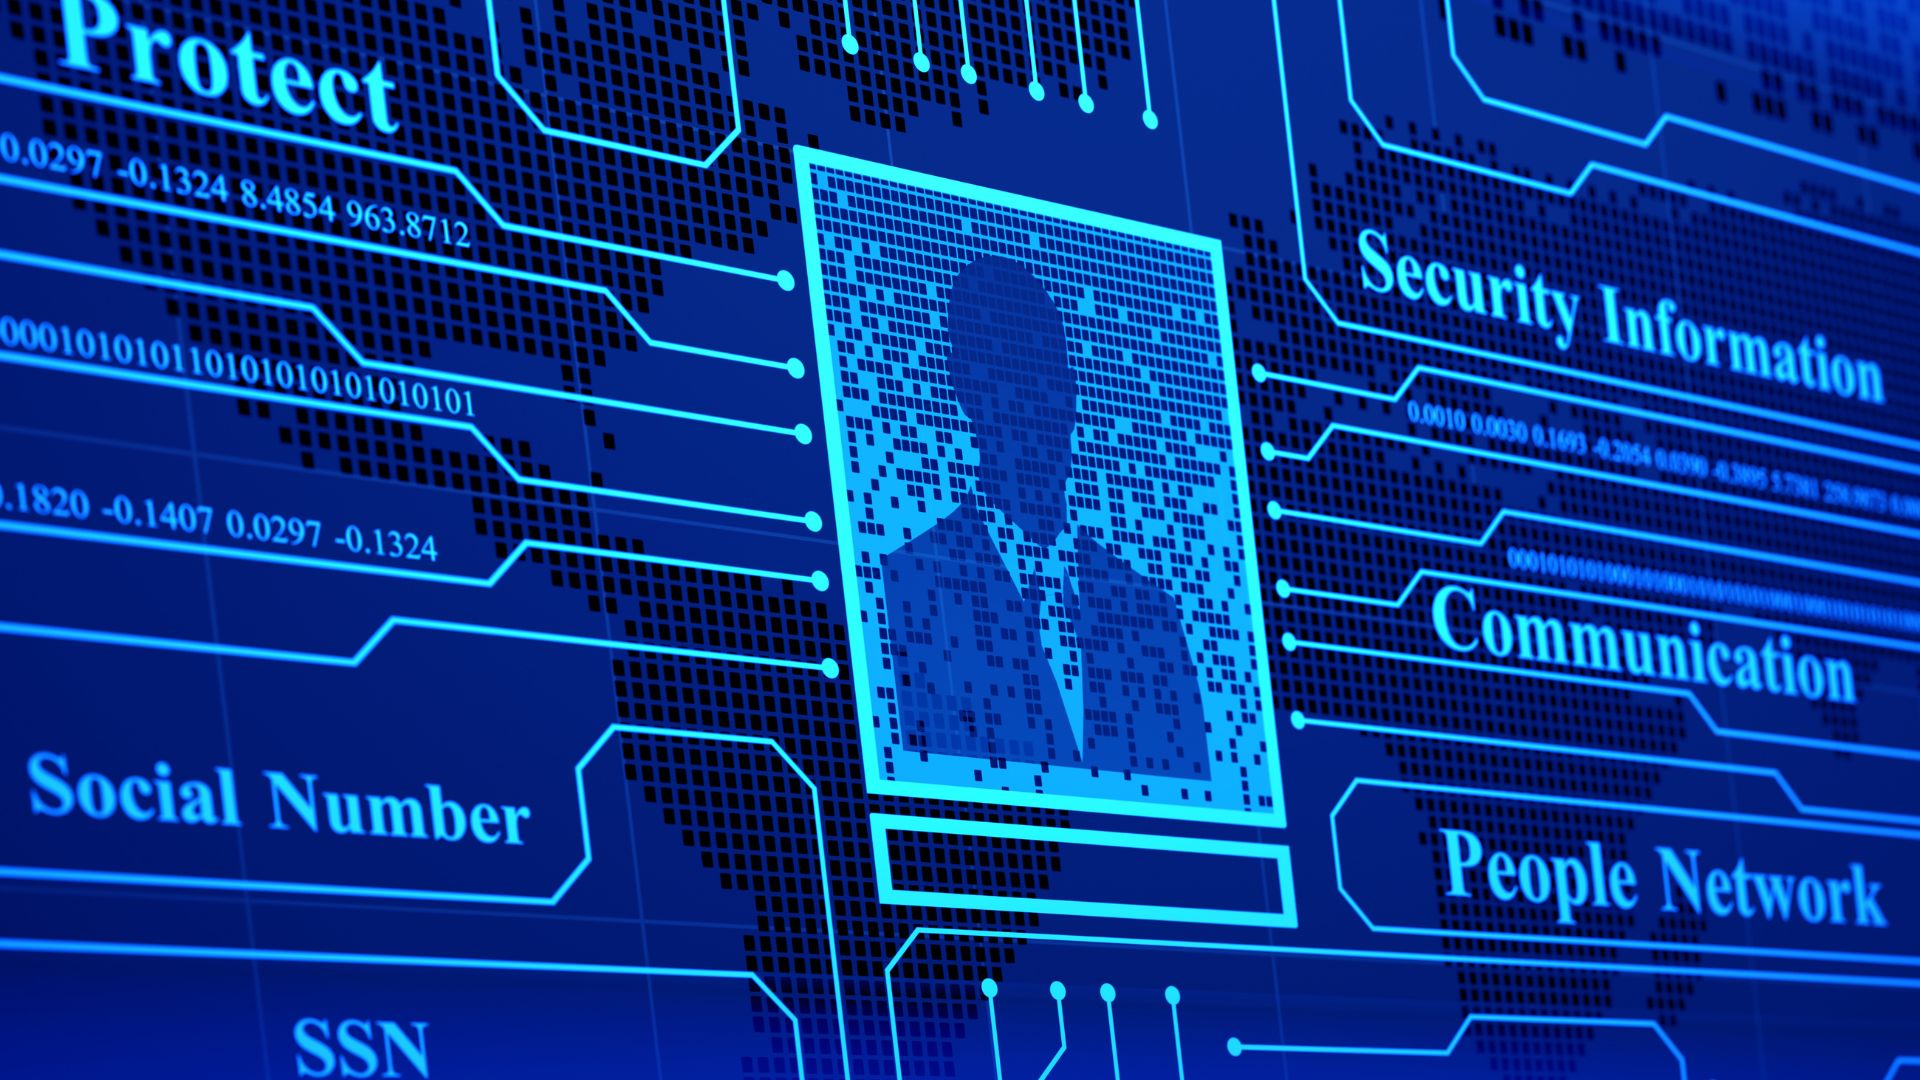 Cybersecurity is crucial to protect company data as well as personal data